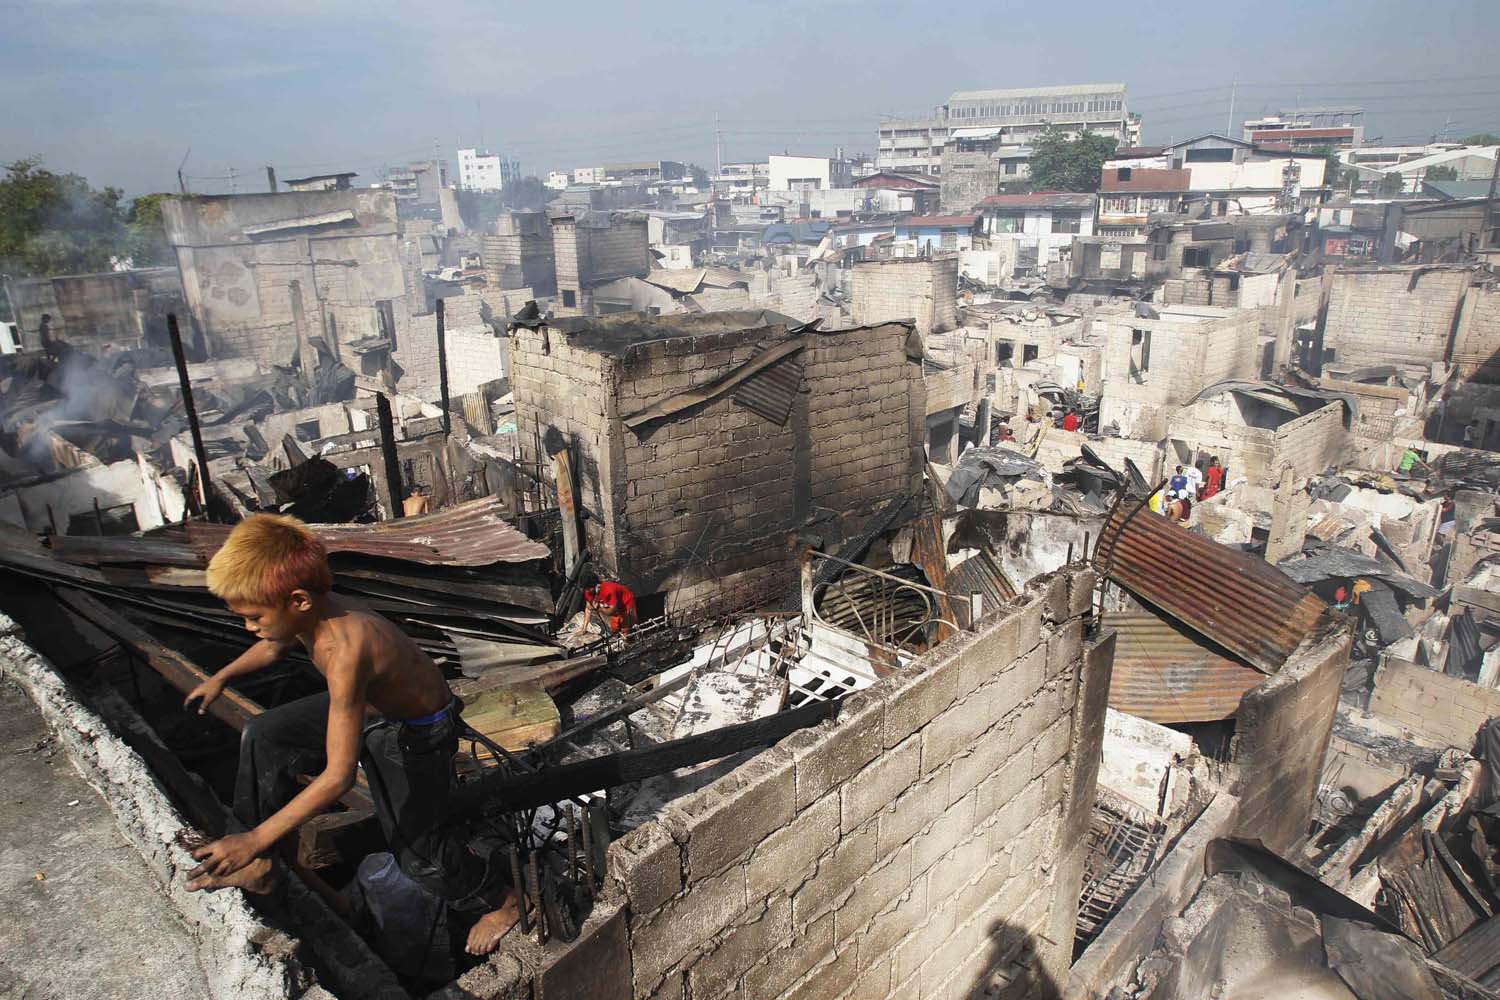 Apr. 21, 2014. A boy climbs out of a charred shanty as he collects reusable materials after a fire razed through a slum area in Caloocan City, Metro Manila.